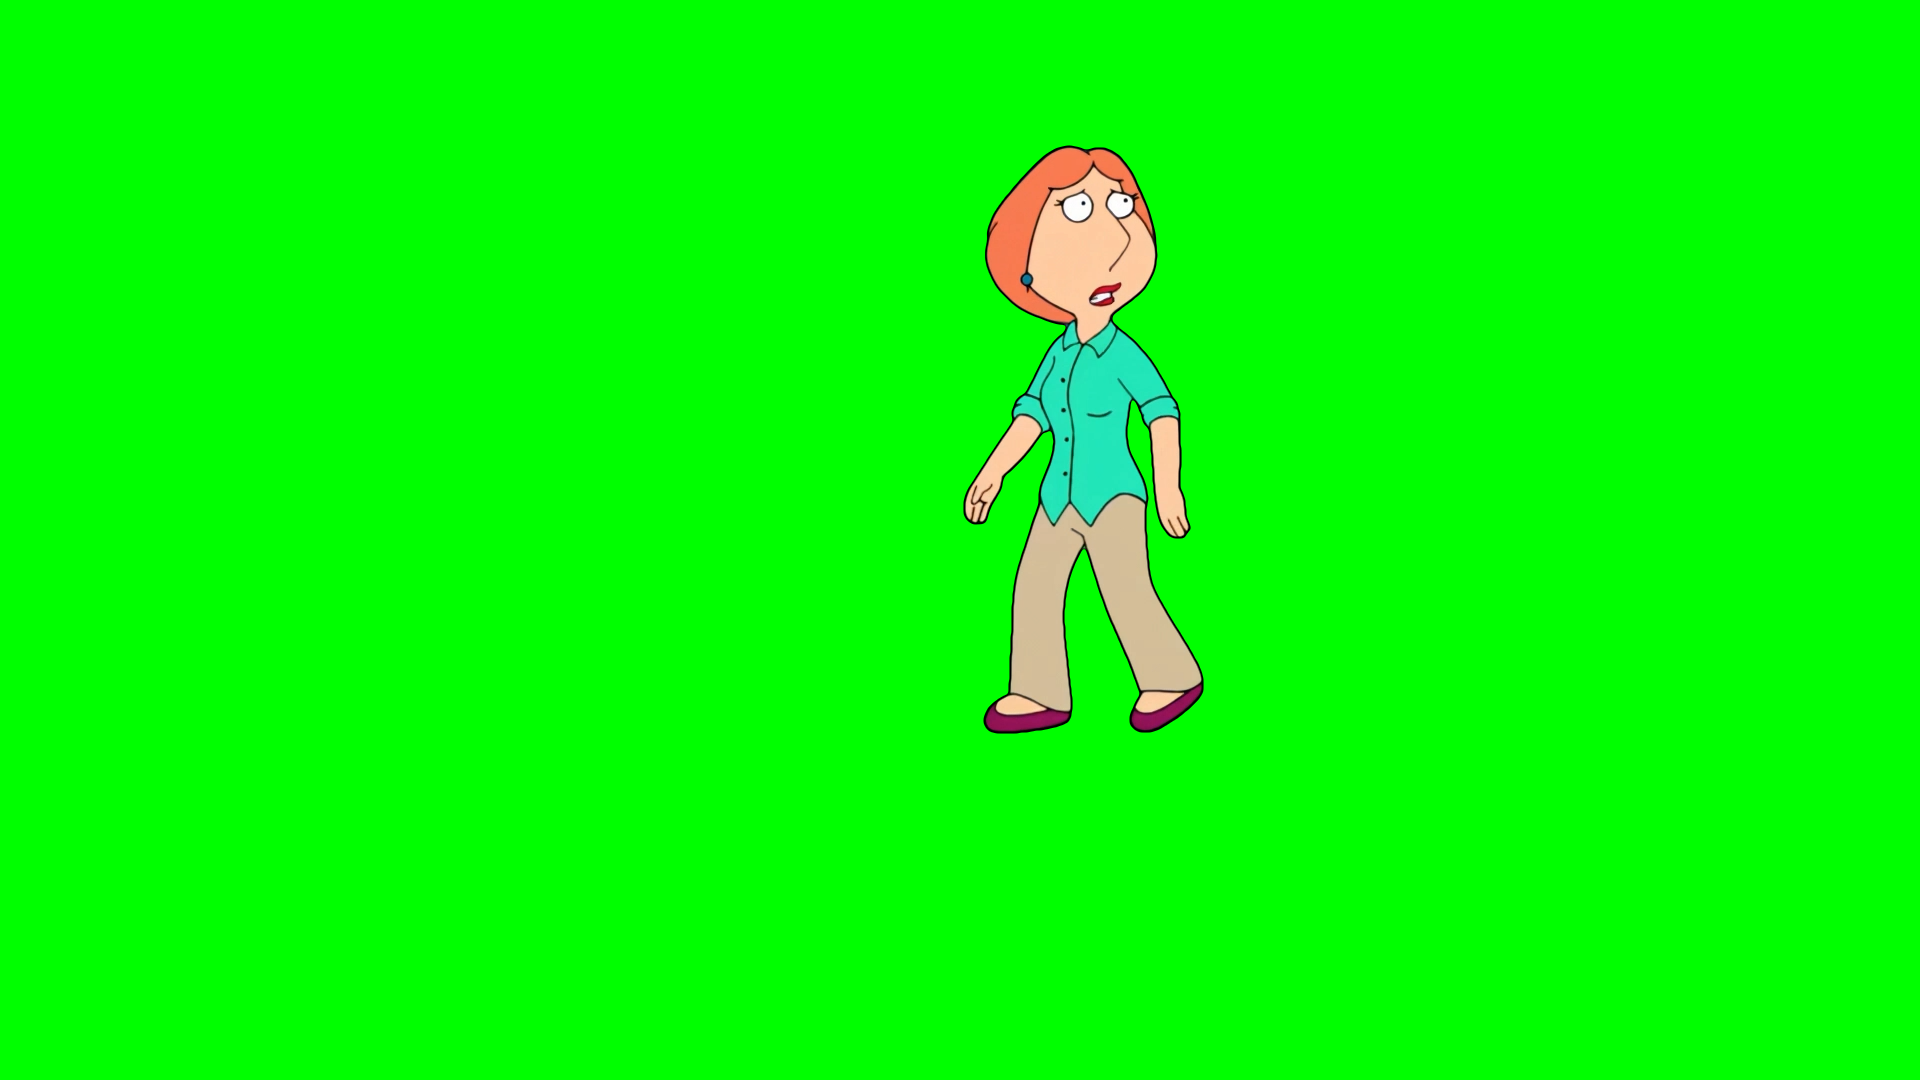 Lois Griffin “Who ever you are, thank you!” Family Guy meme (Green Screen)